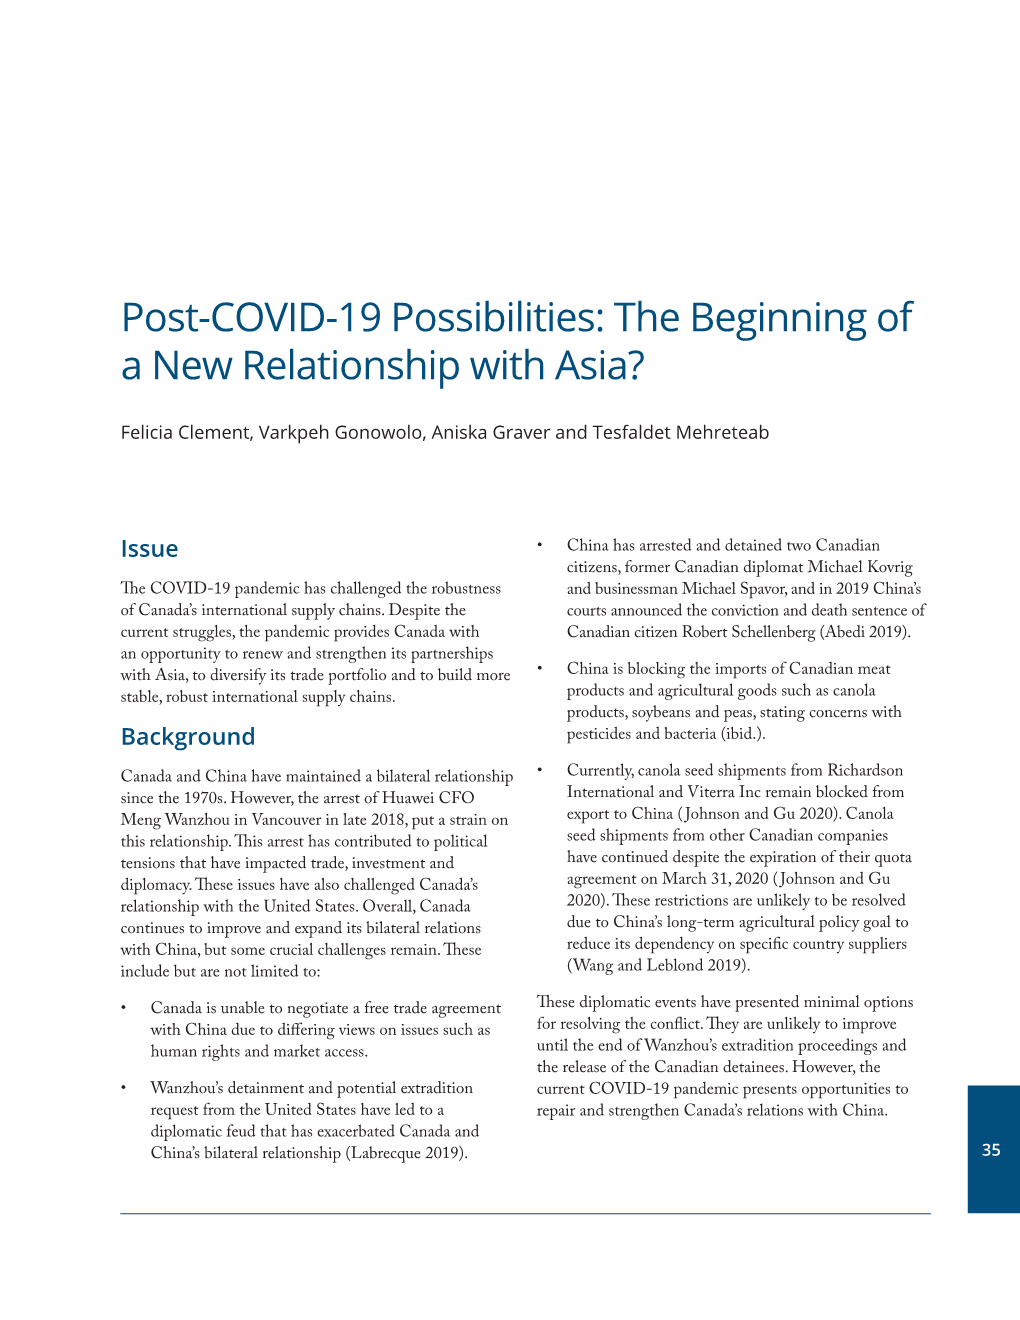 Post-COVID-19 Possibilities: the Beginning of a New Relationship